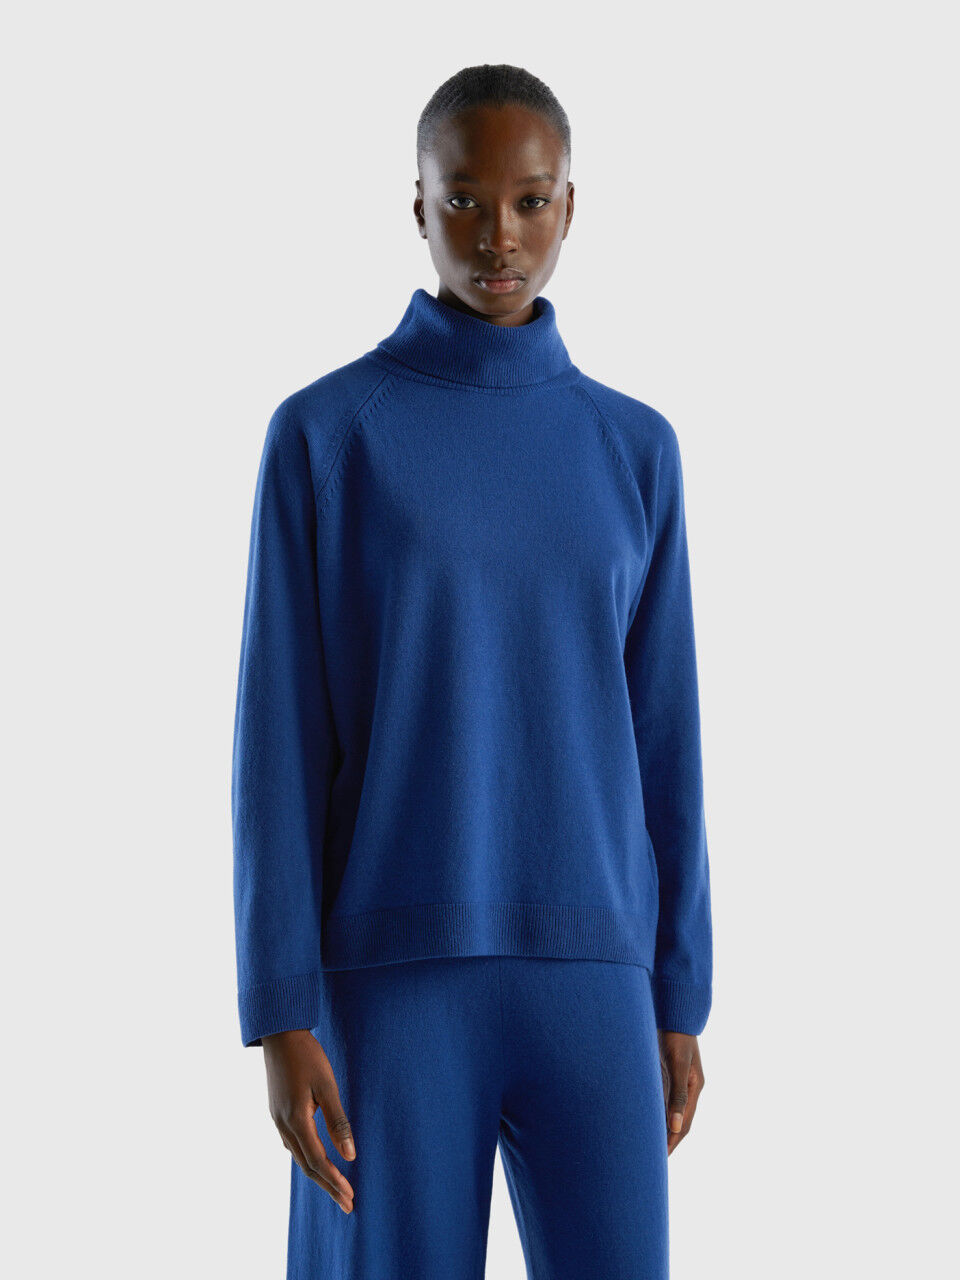 Midnight blue turtleneck in wool and cashmere blend